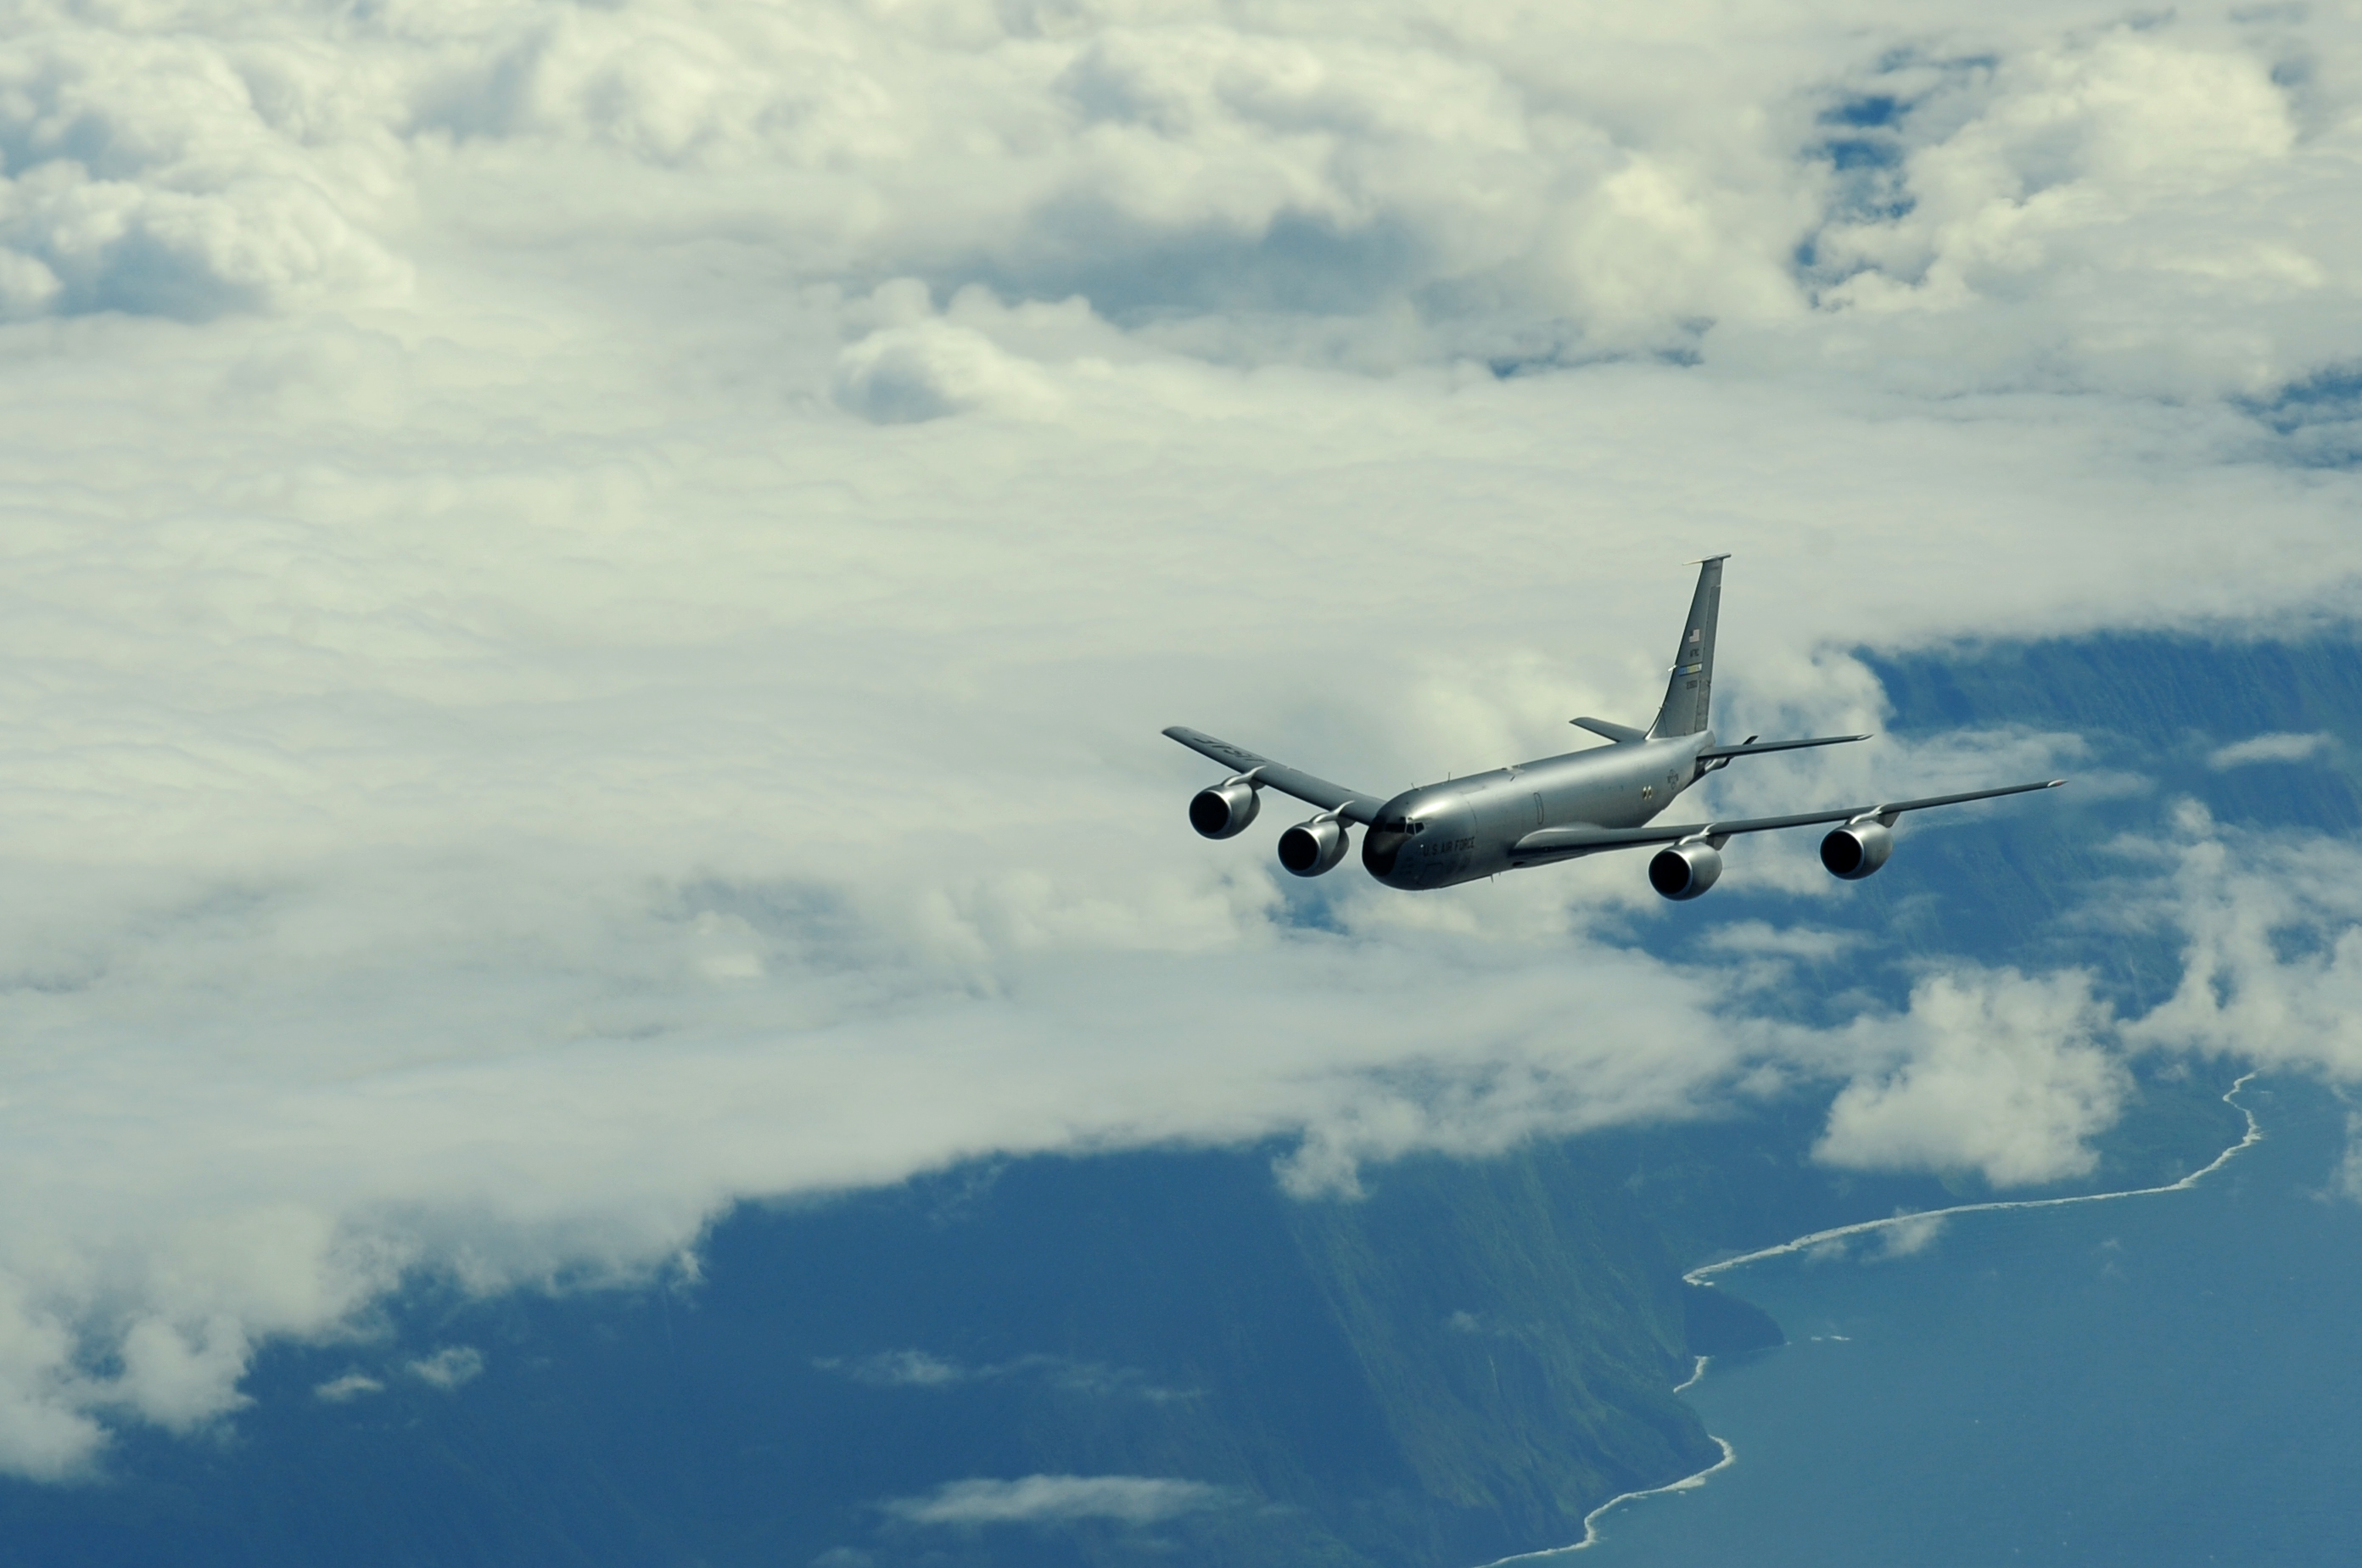 US Navy 100710-F-5964B-320 A KC-135 stratotanker flies a mission to support Rim of the Pacific (RIMPAC) 2010 exercises